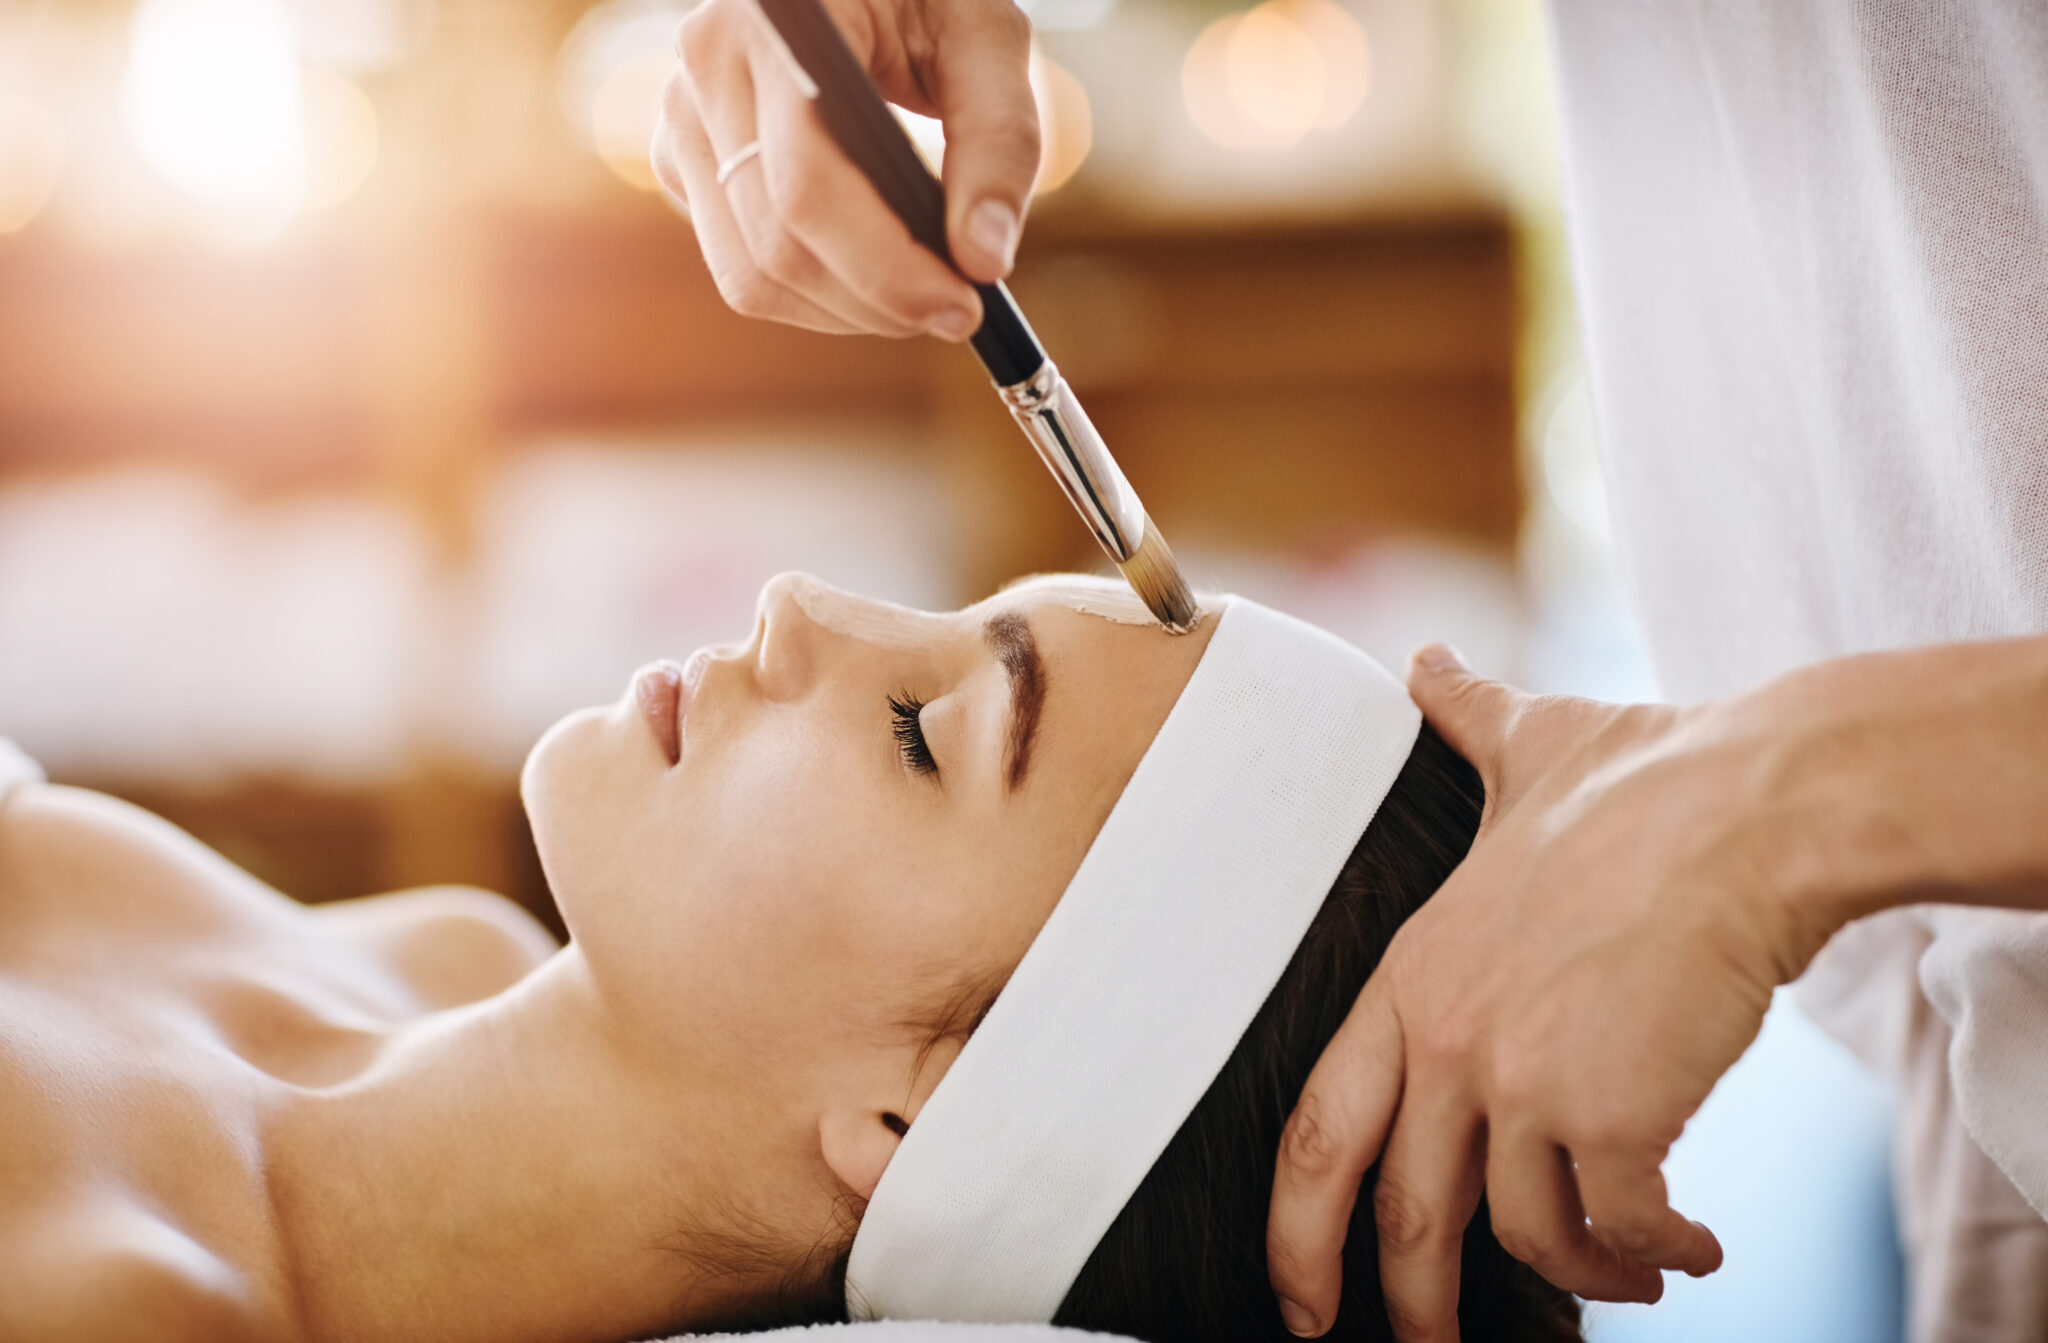 Woman receiving chemical peel treatment on her forehead